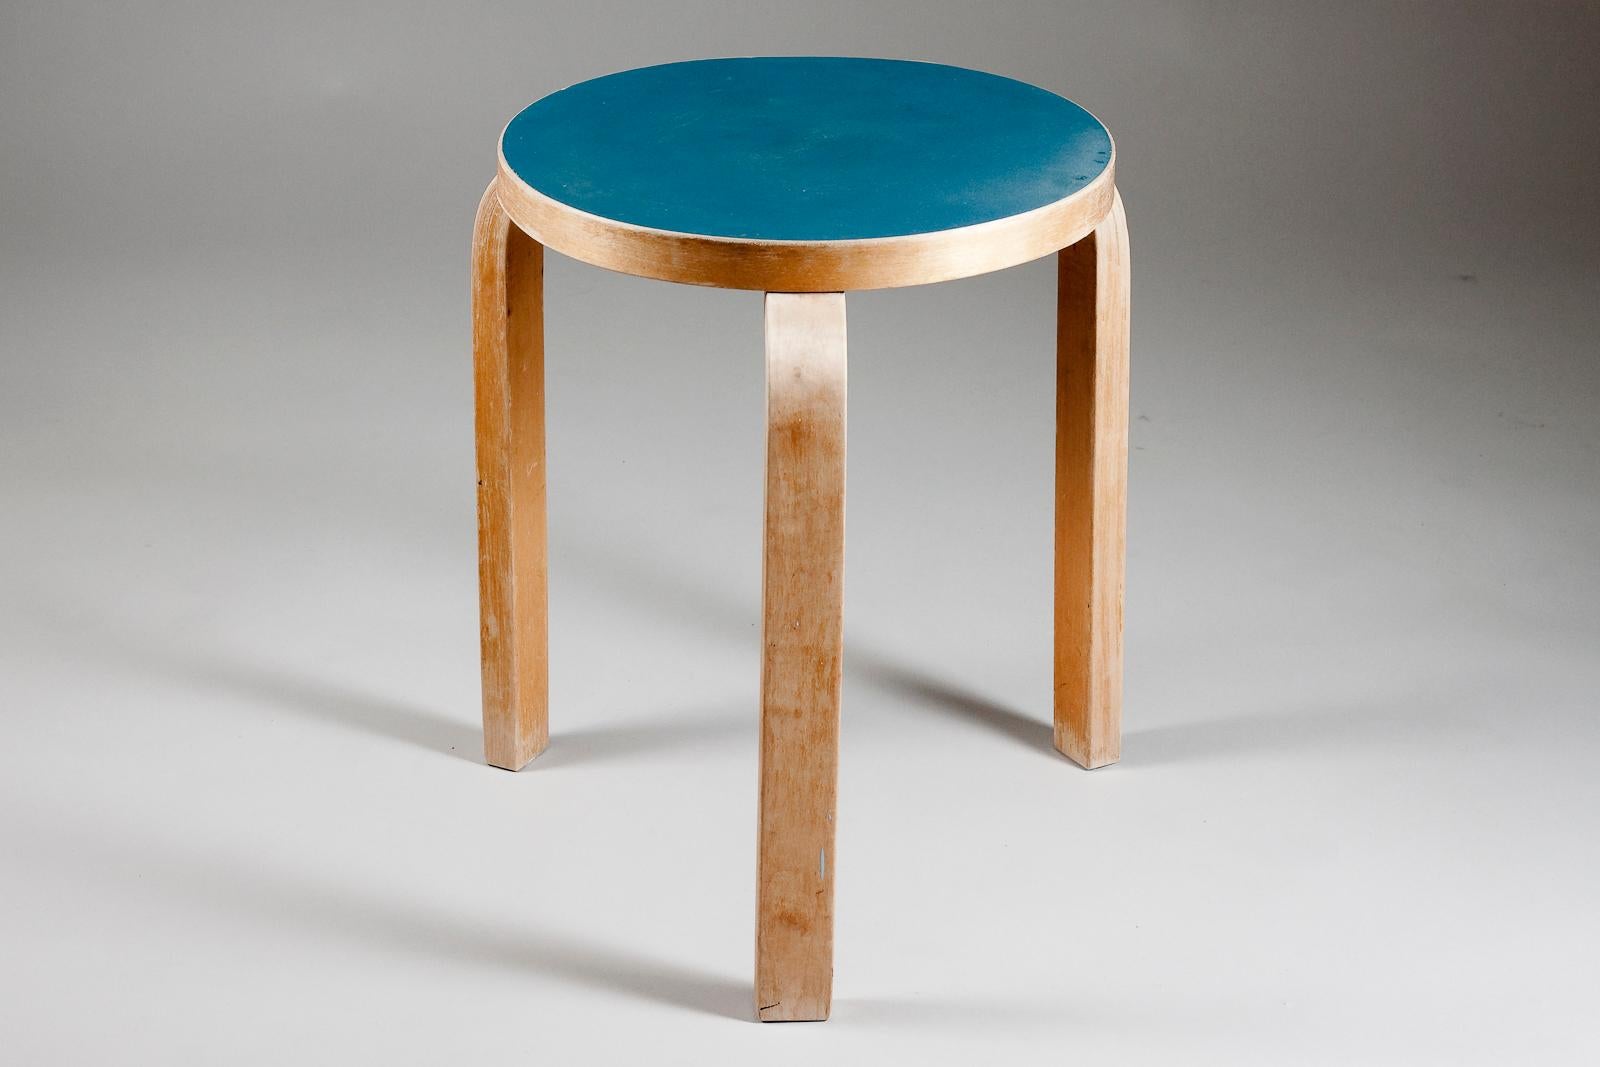 Alvar Aalto original stool 60 with blue linoleum top and bent L-legs in birch made by Artek in Finland. This three legged 60 stool has a great colour and patina. The 60-stool was designed in 1930s and quickly became a best seller around the world